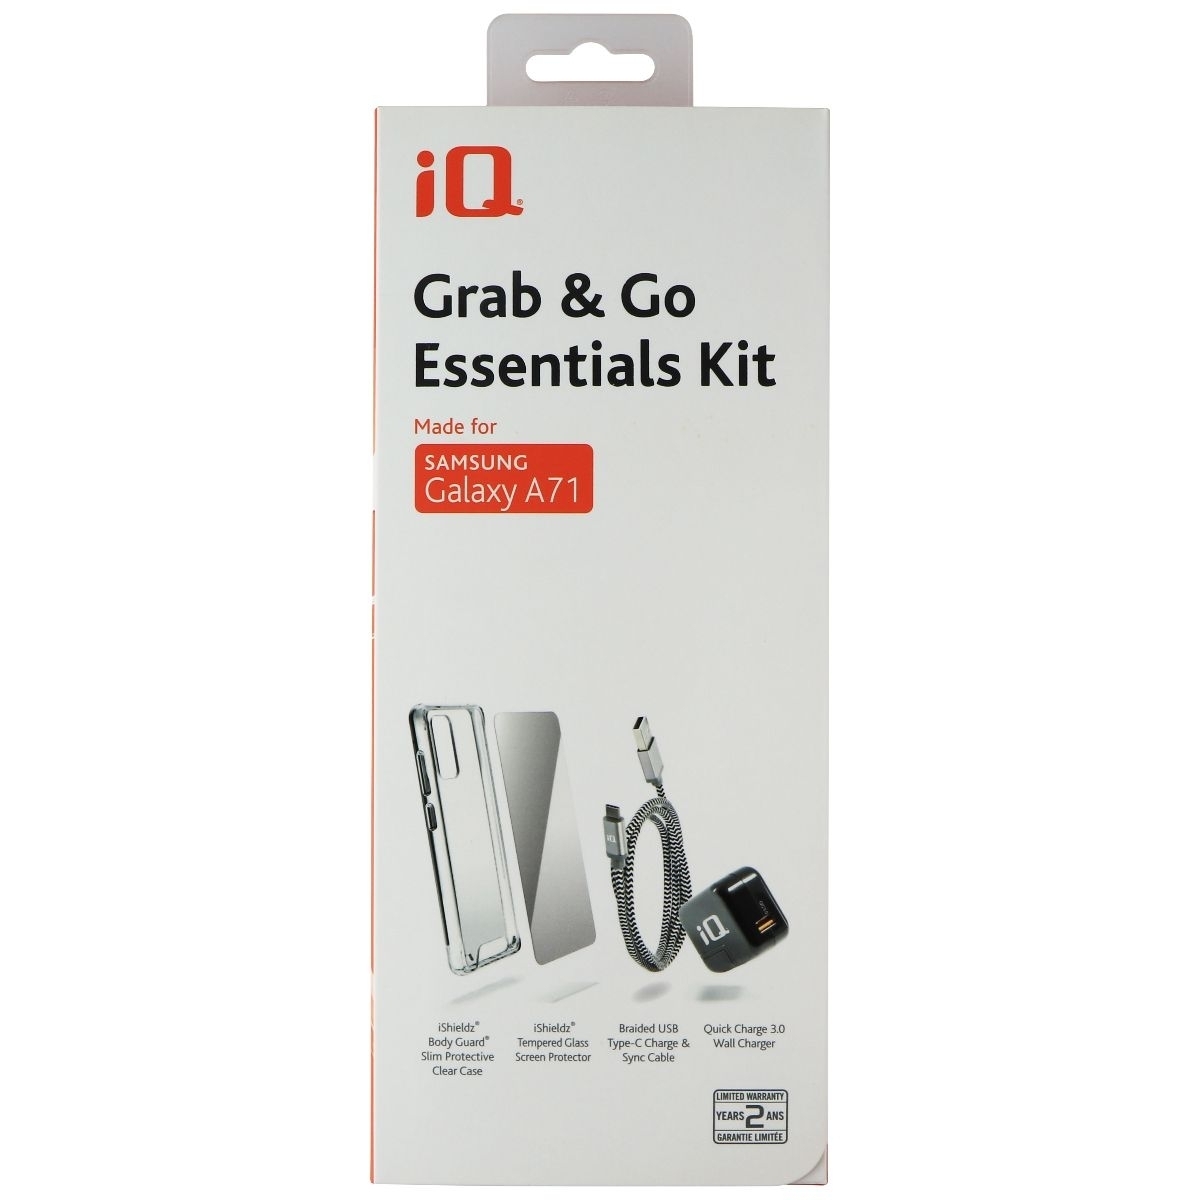 IQ Grab & Go Essentials Kit Charger And Case Kit For Samsung Galaxy A71 - Clear (Refurbished)